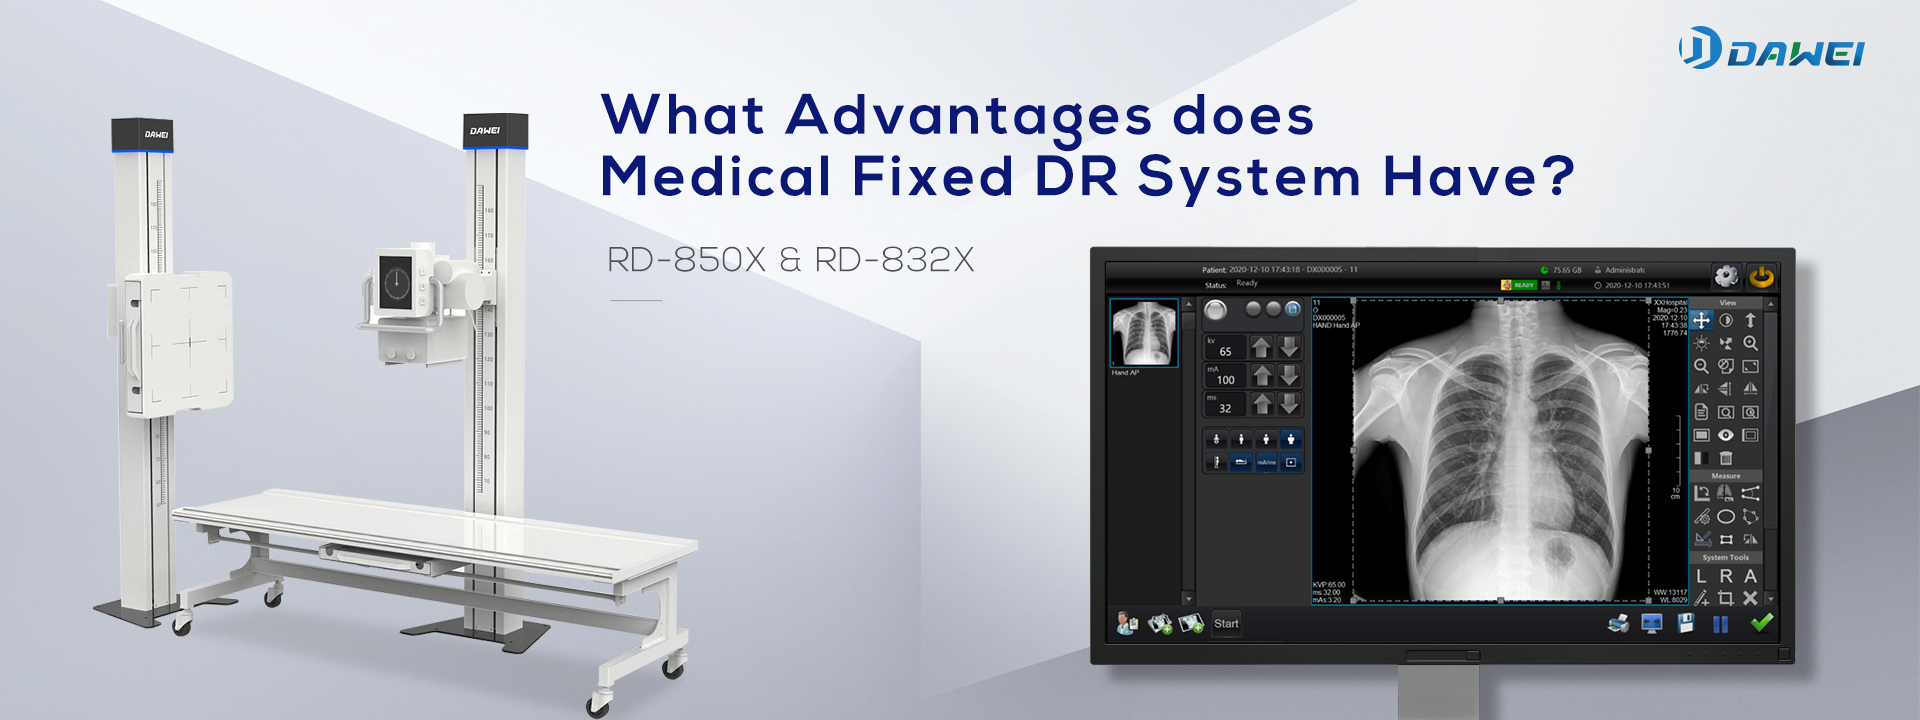 What Advantages does Medical Fixed DR System Have?